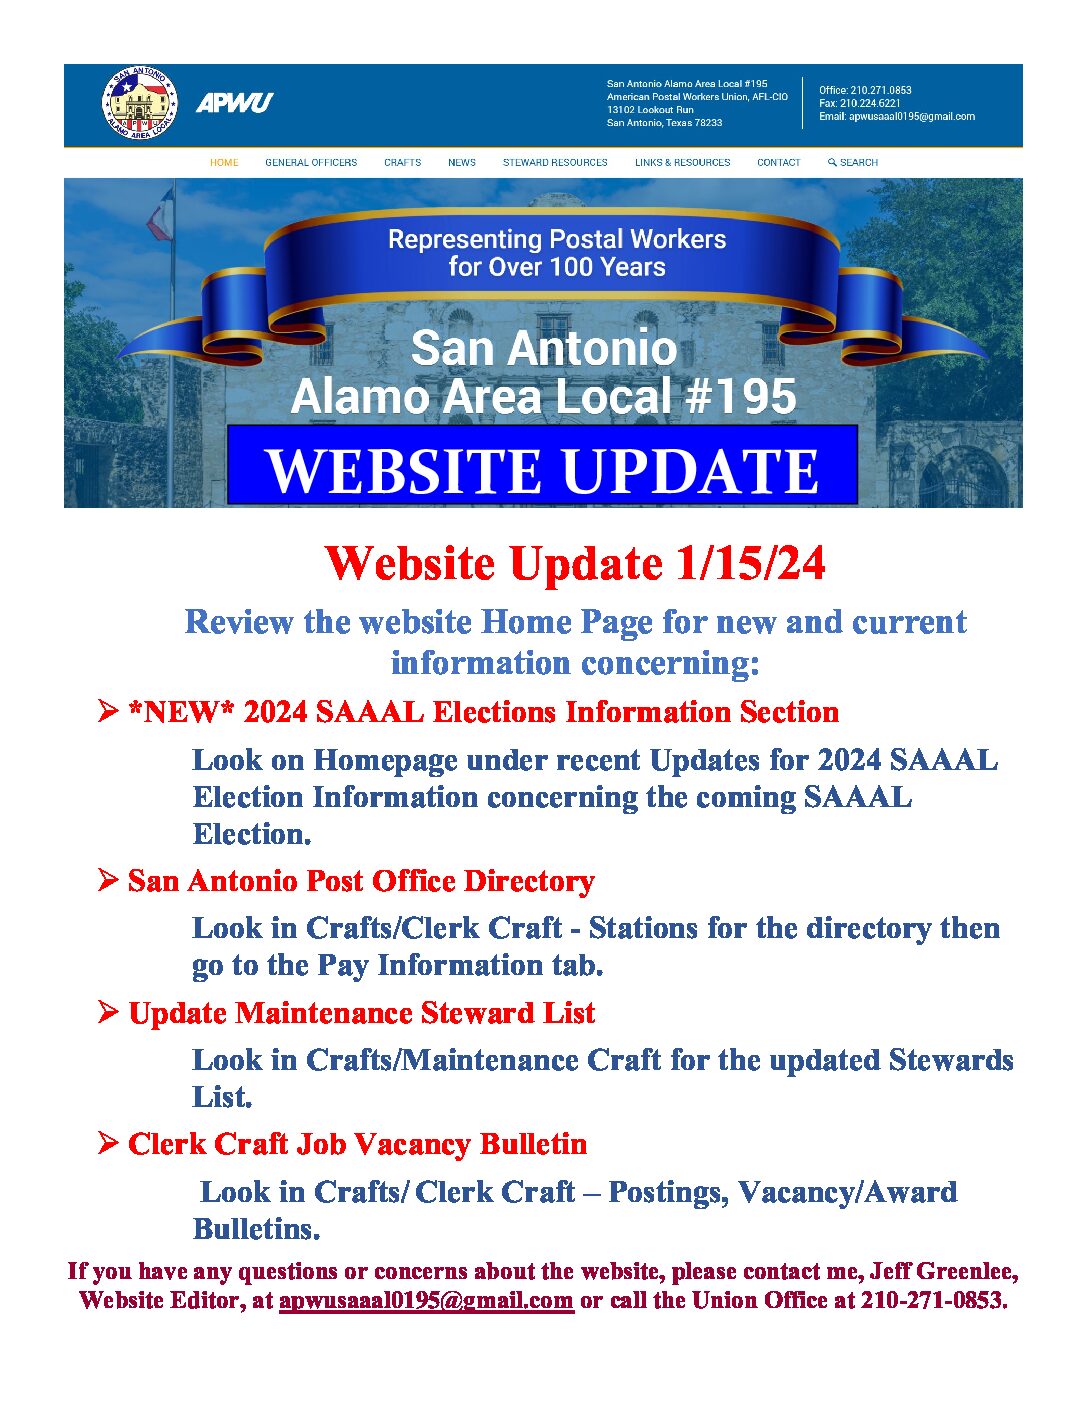 Website Update Quick Reference 1/15/24 - 